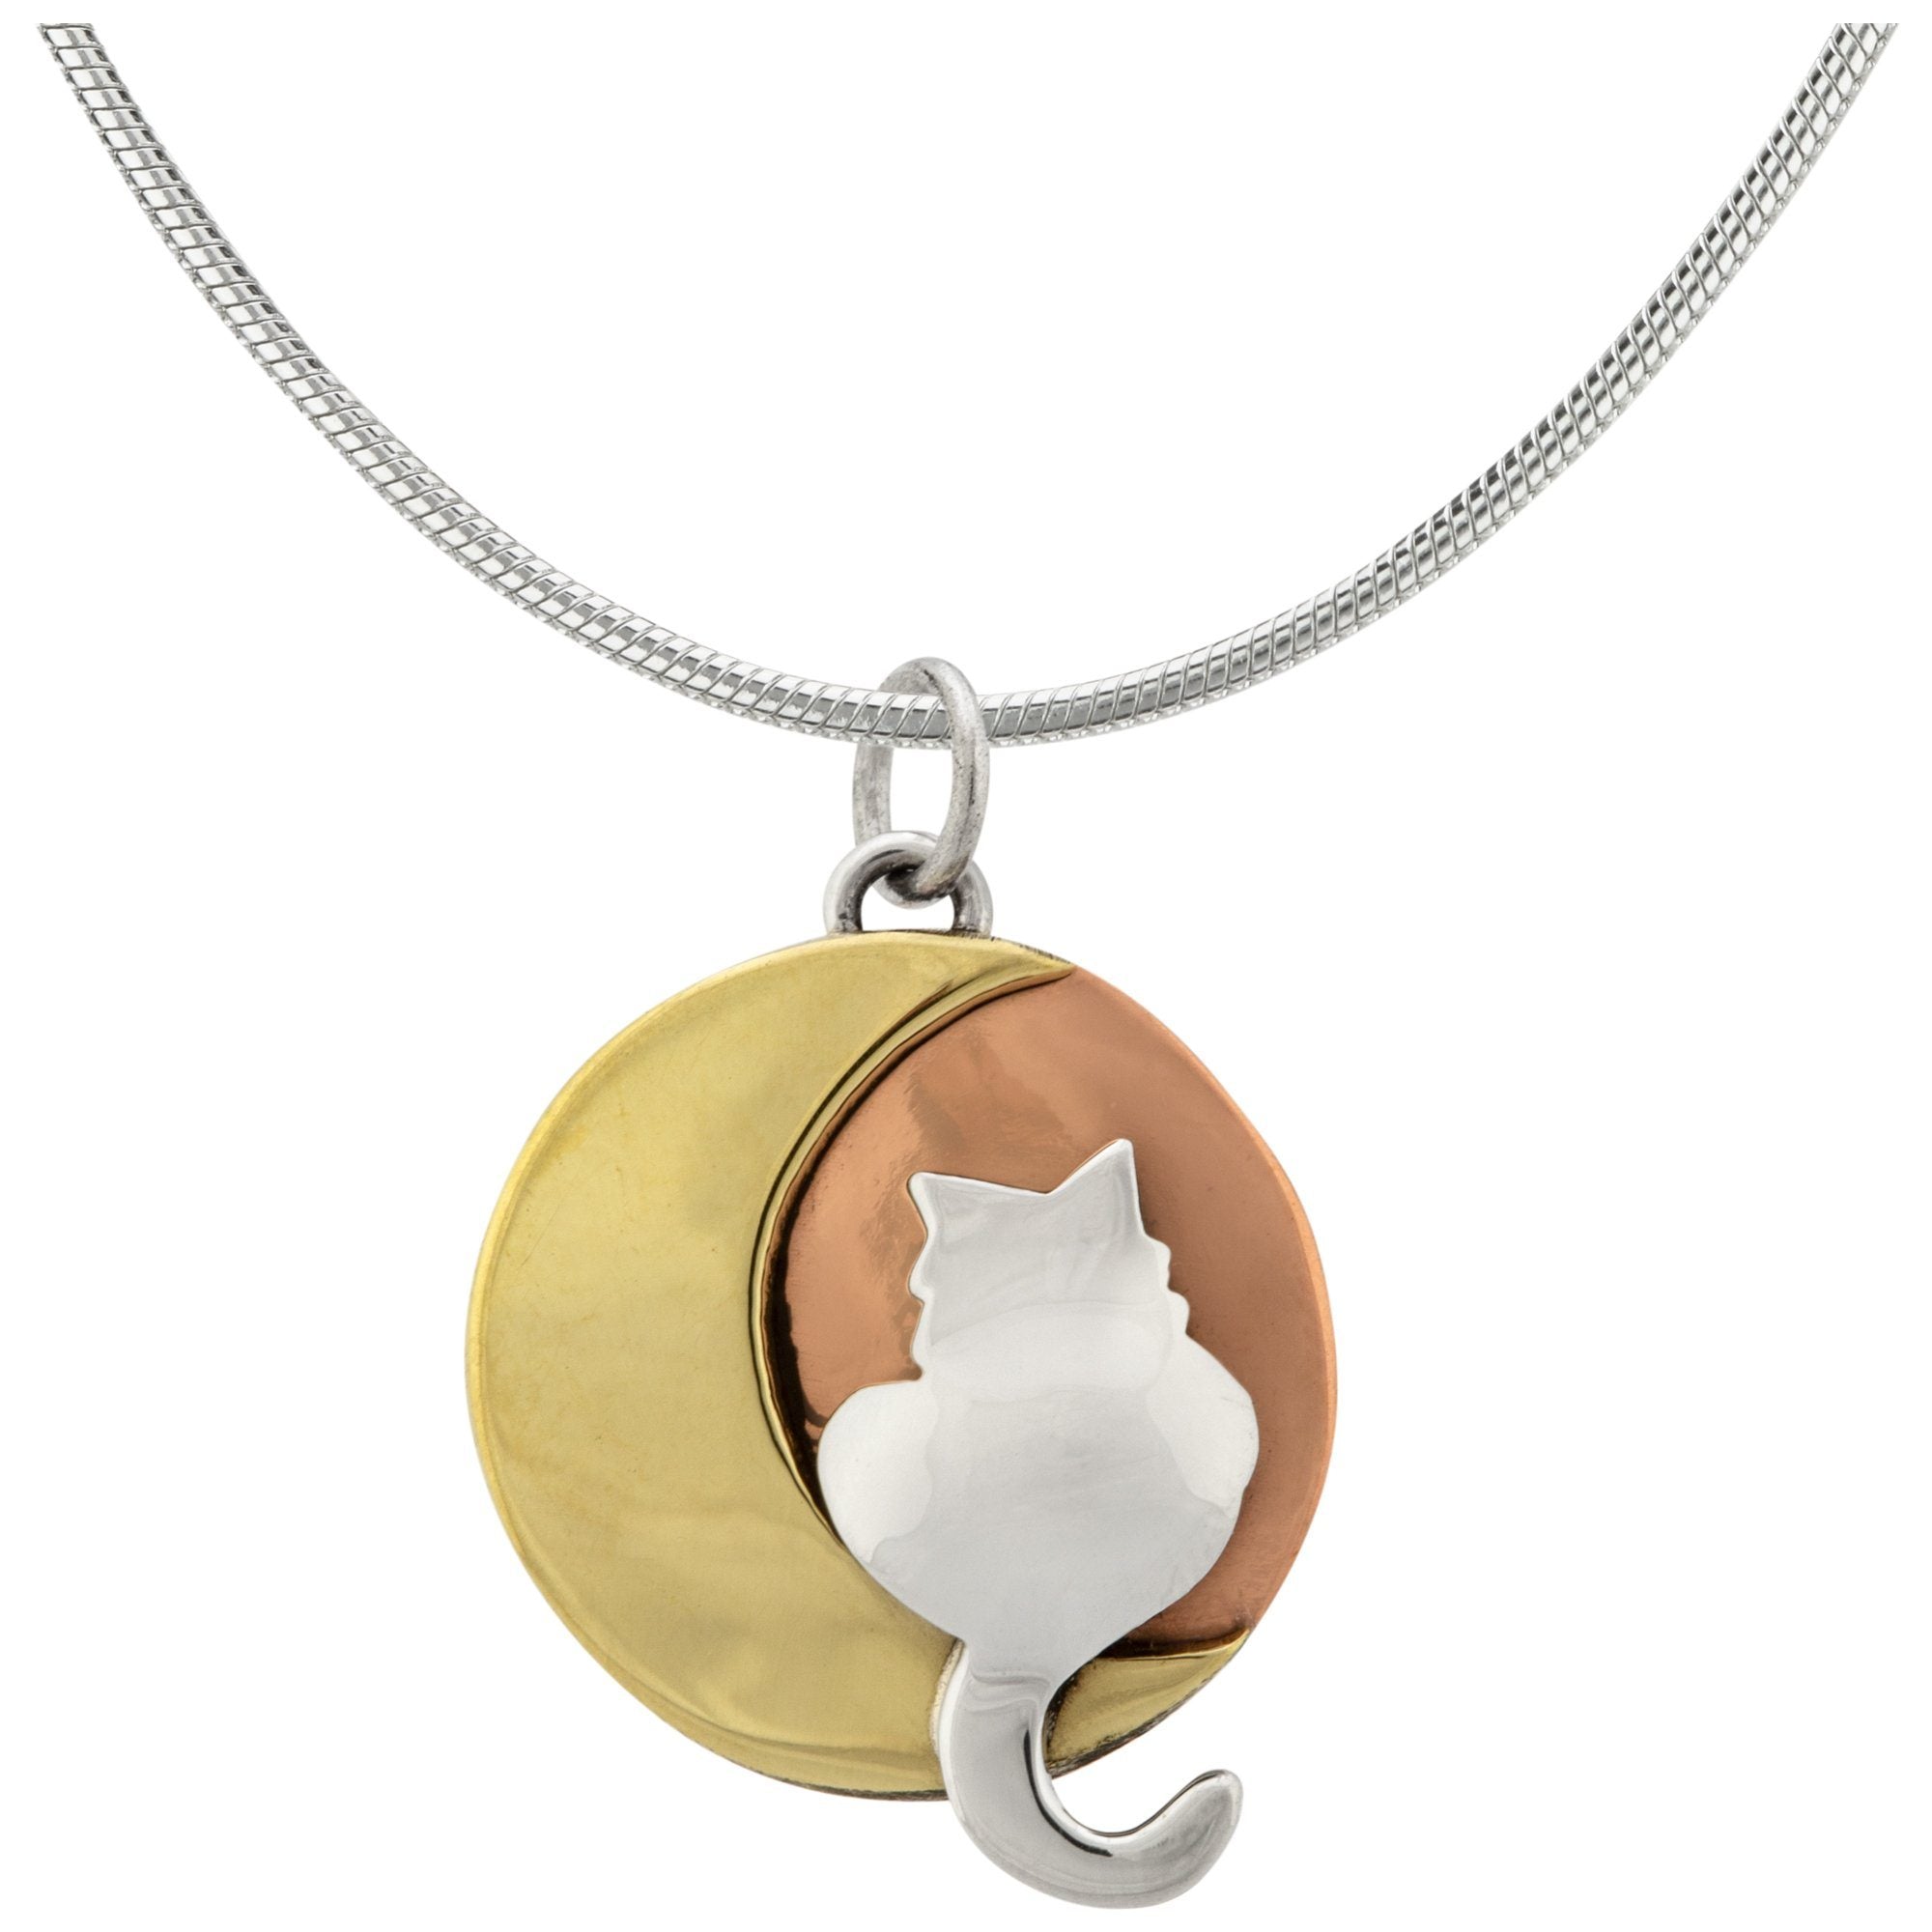 Moonlight Cat Necklace - Pendant Only